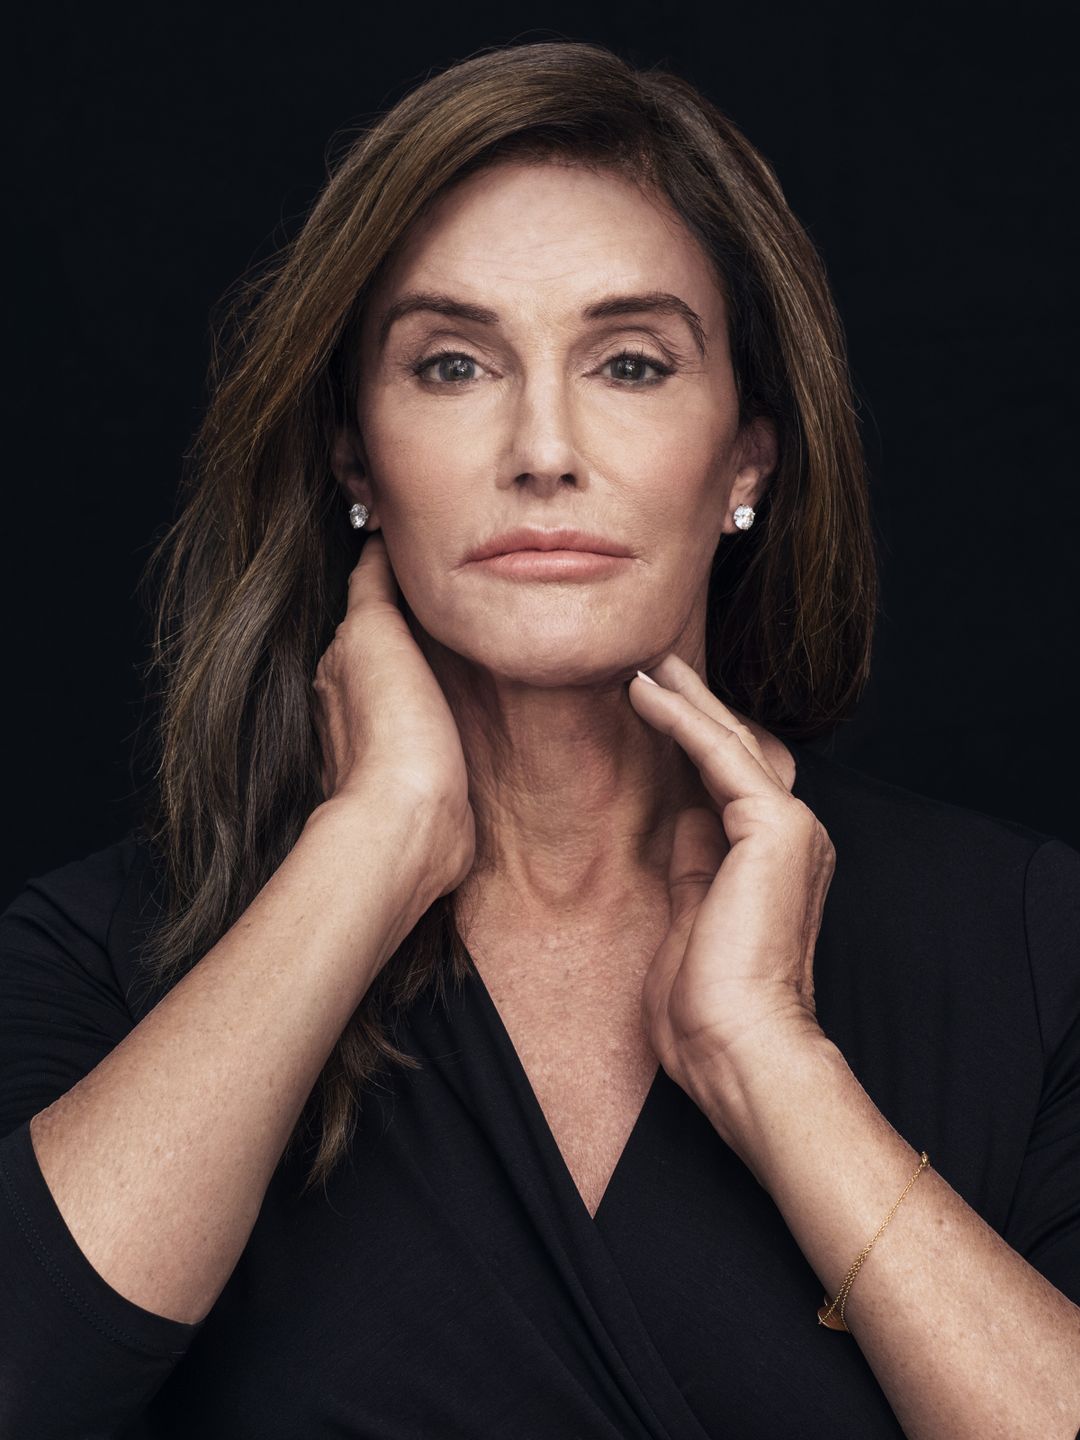 Caitlyn Jenner how old is she